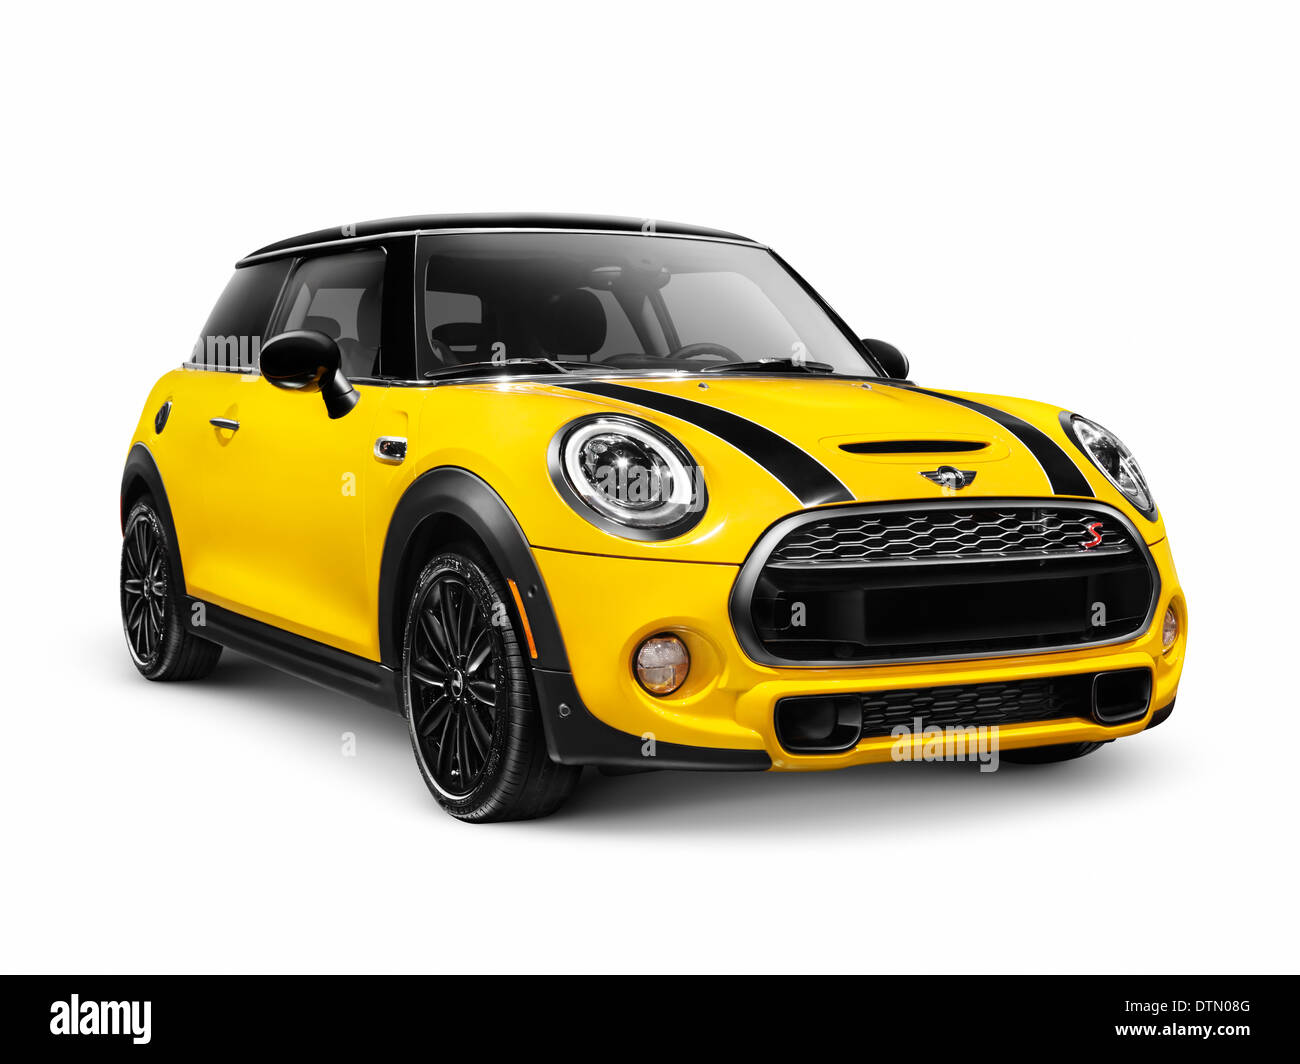 License available at MaximImages.com - Yellow 2014 Mini Cooper S, Mini Hatch, hatchback compact city car isolated on white background Stock Photo